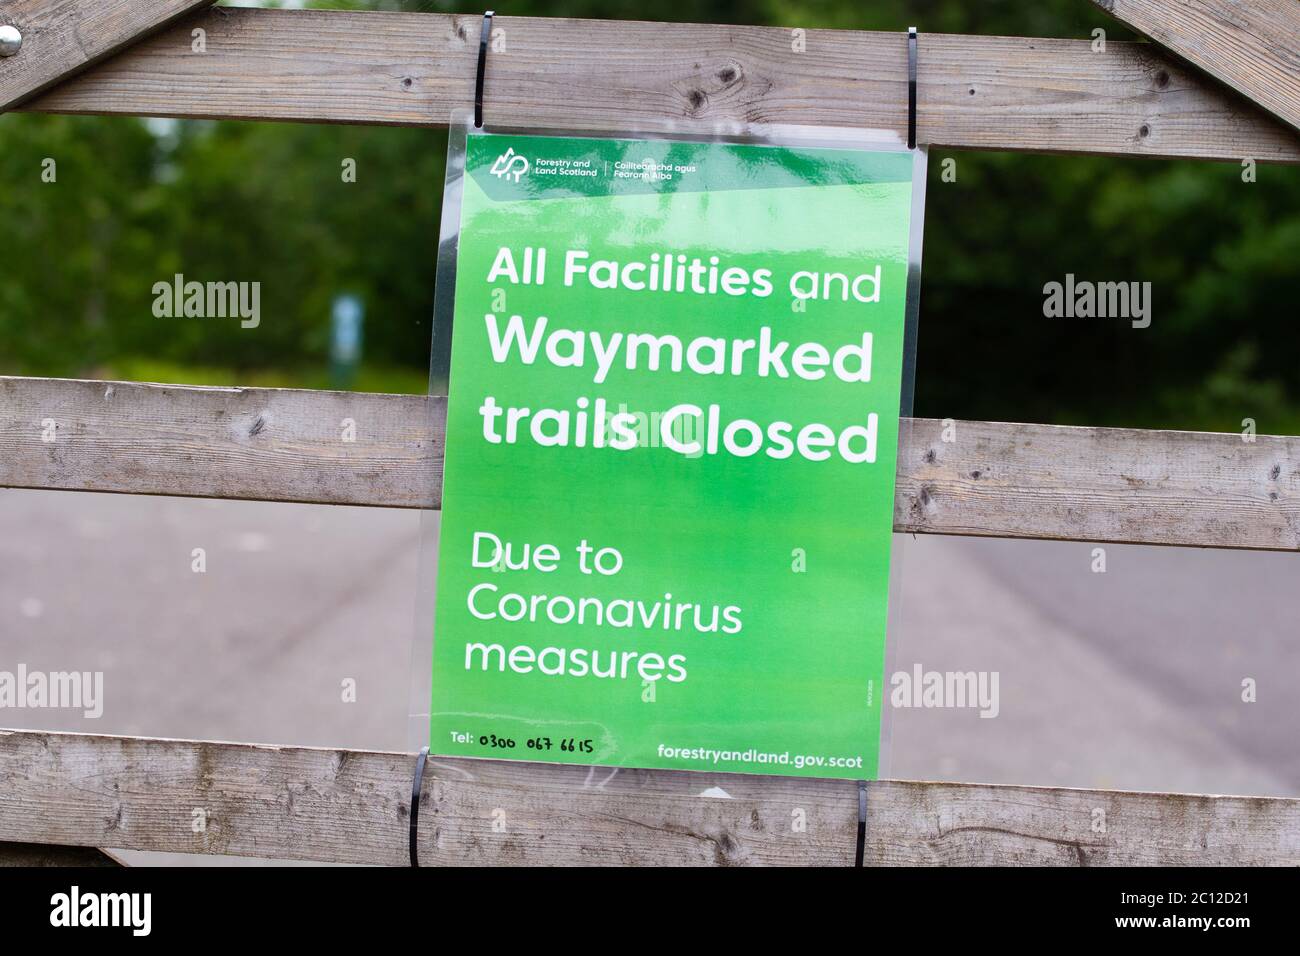 The Lodge Forest Visitor Centre Queen Elizabeth Park car park, all facilities and waymarked trails closed due to coronavirus measures, Scotland, UK Stock Photo